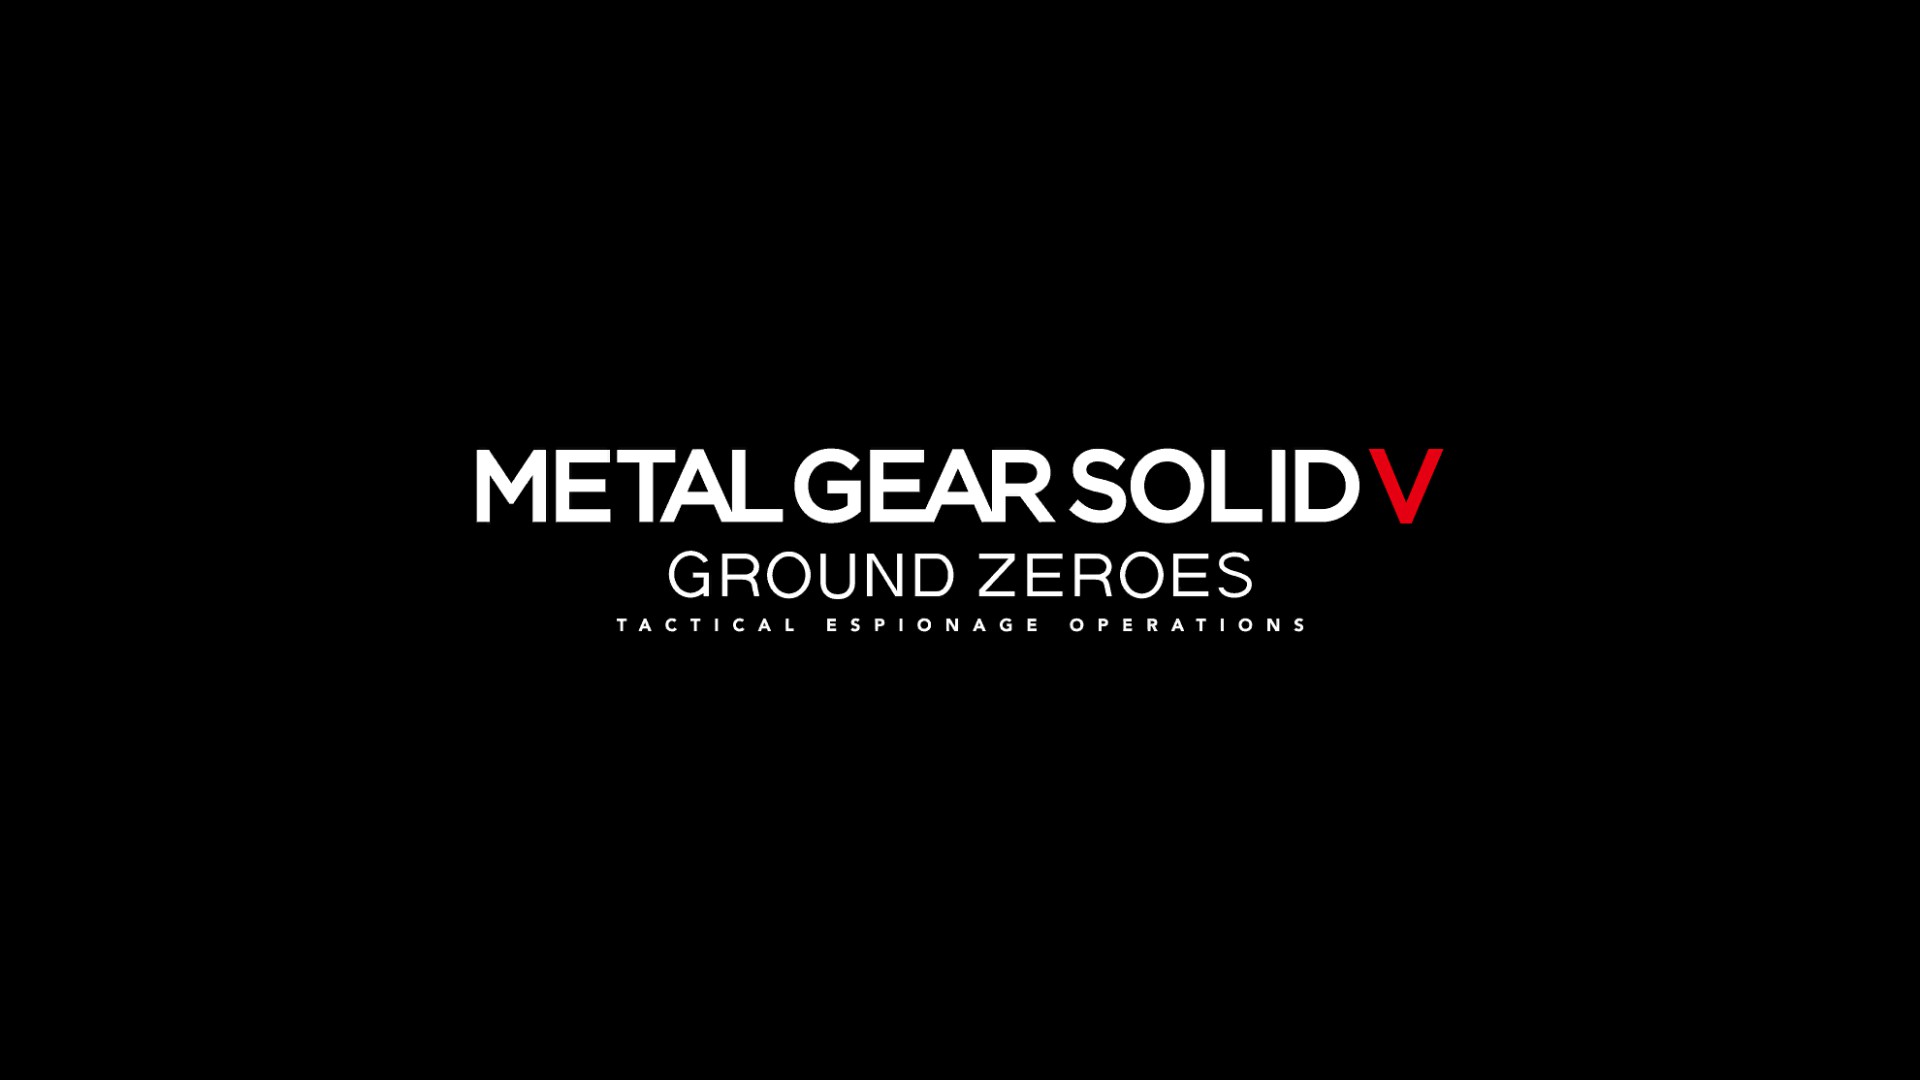 video game, metal gear solid v: ground zeroes, metal gear solid